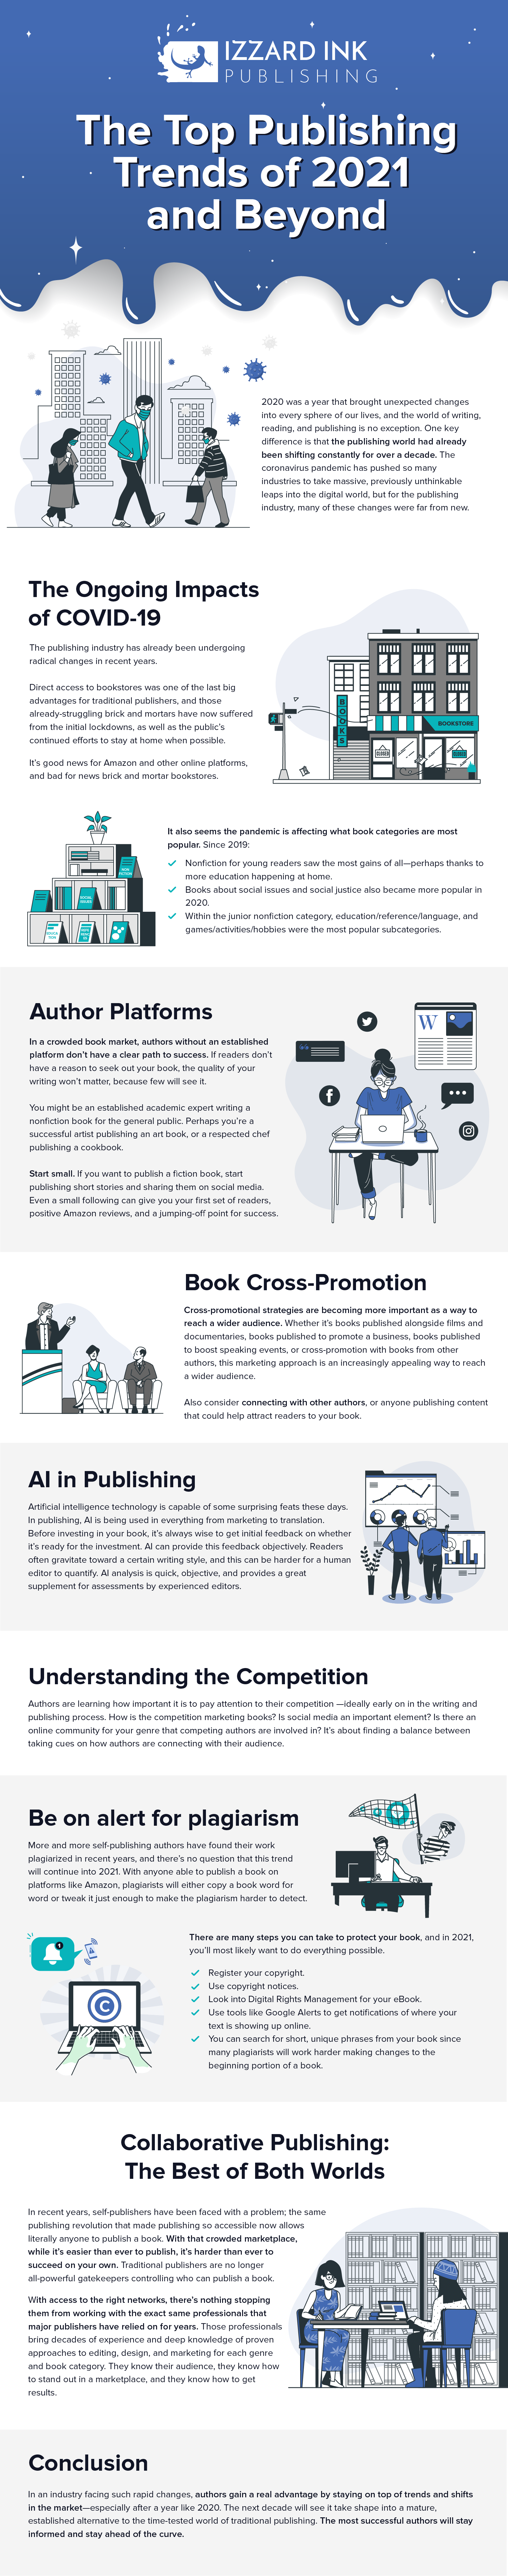 The Top Publishing Trends of 2021 and Beyond Infographic